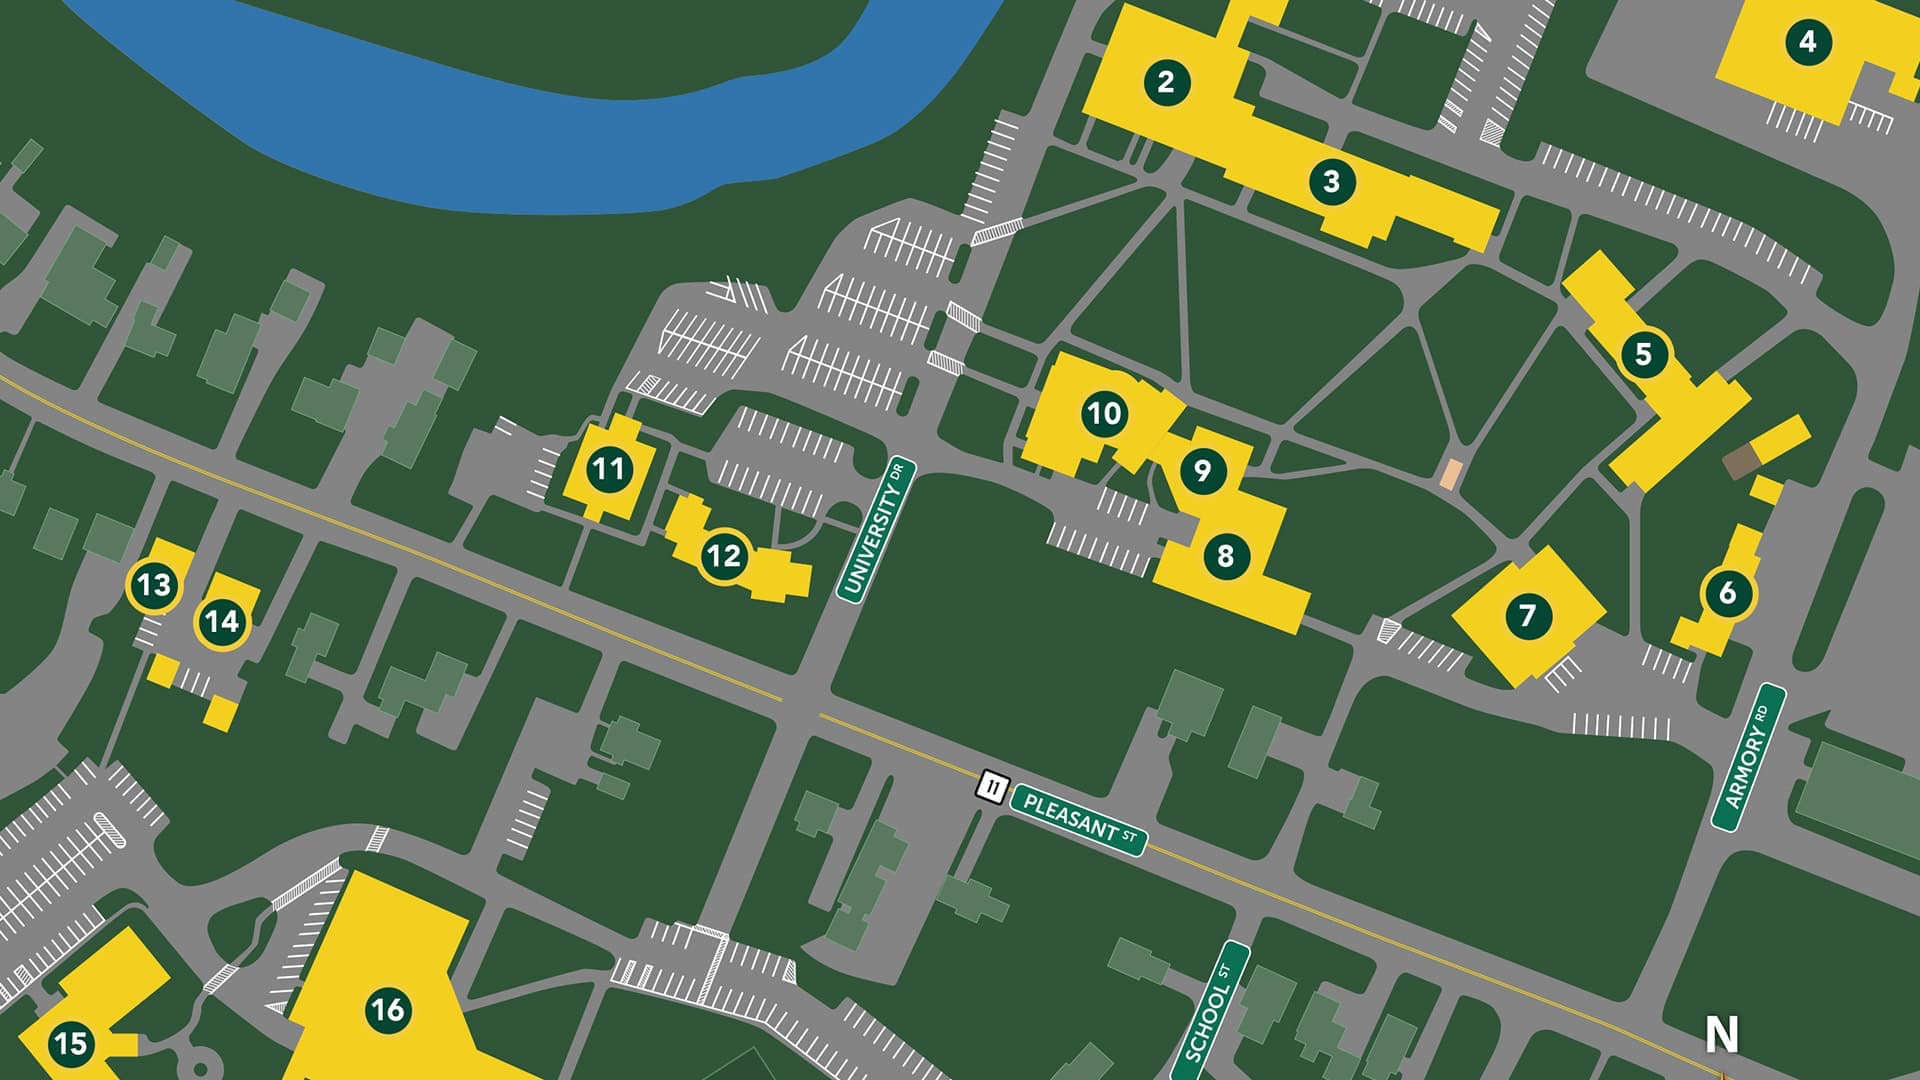 an image showing part of UMFK's campus map